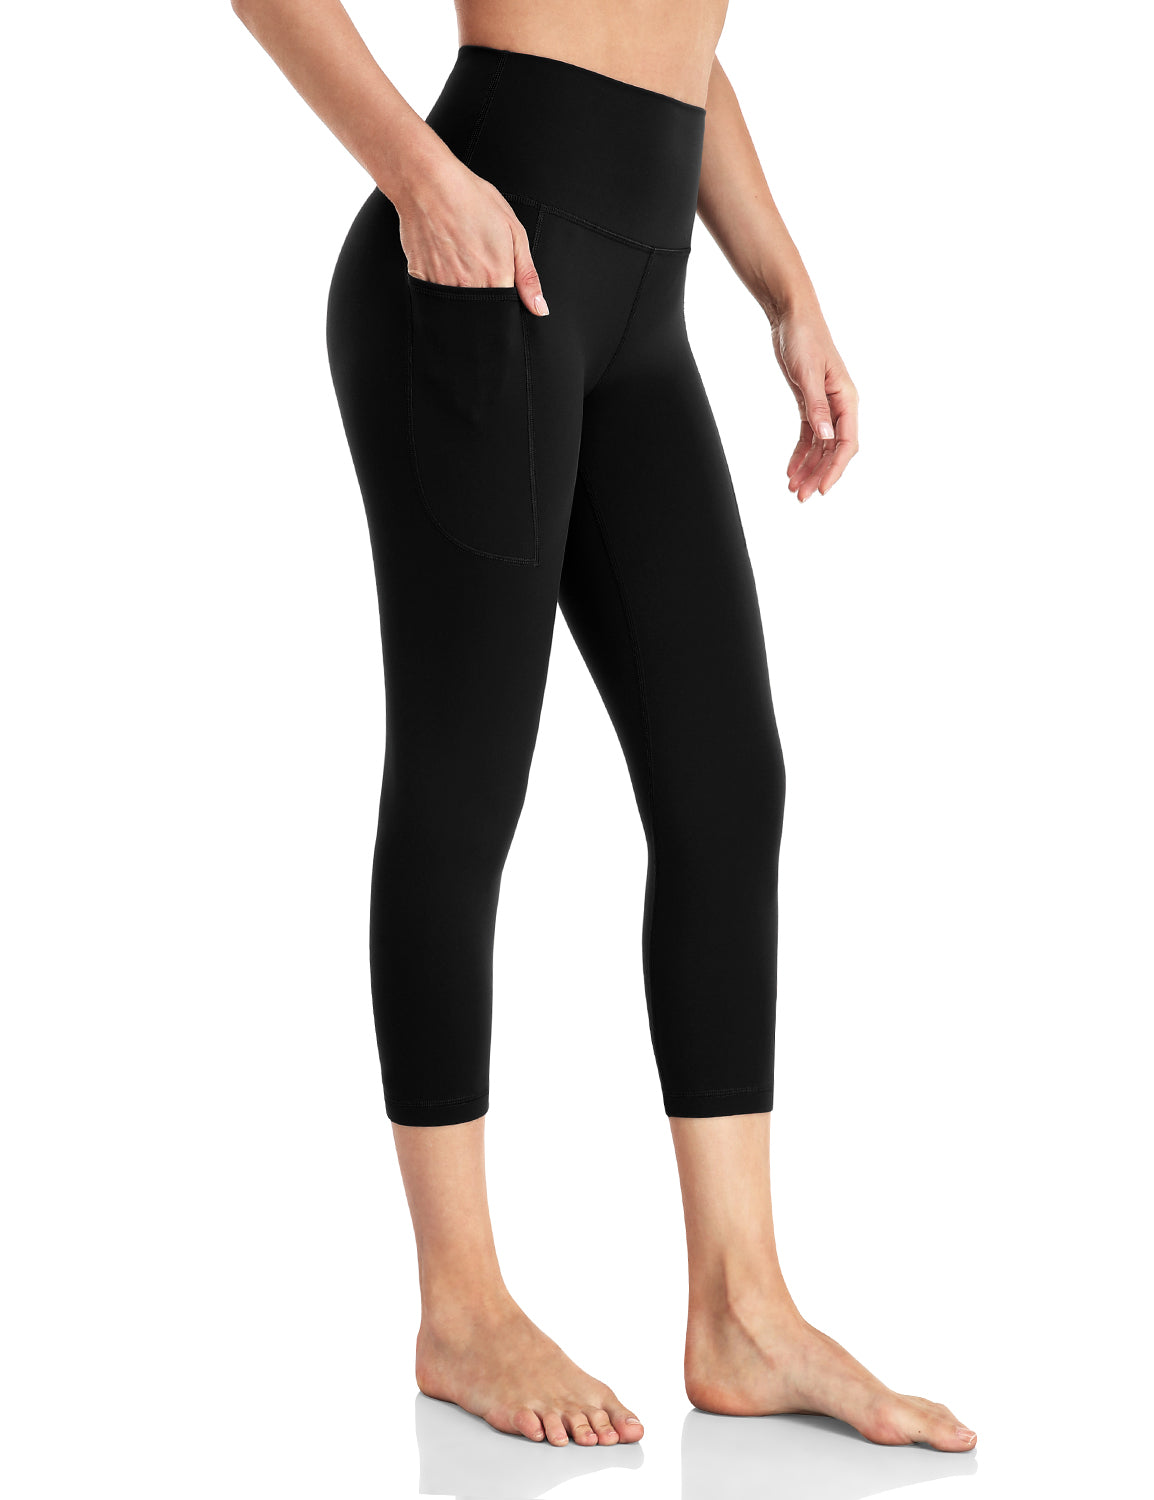 HeyNuts Hawthorn Athletic High Waisted Yoga Leggings For Women, Soft  Workout Pants Compression 7/8 Leggings